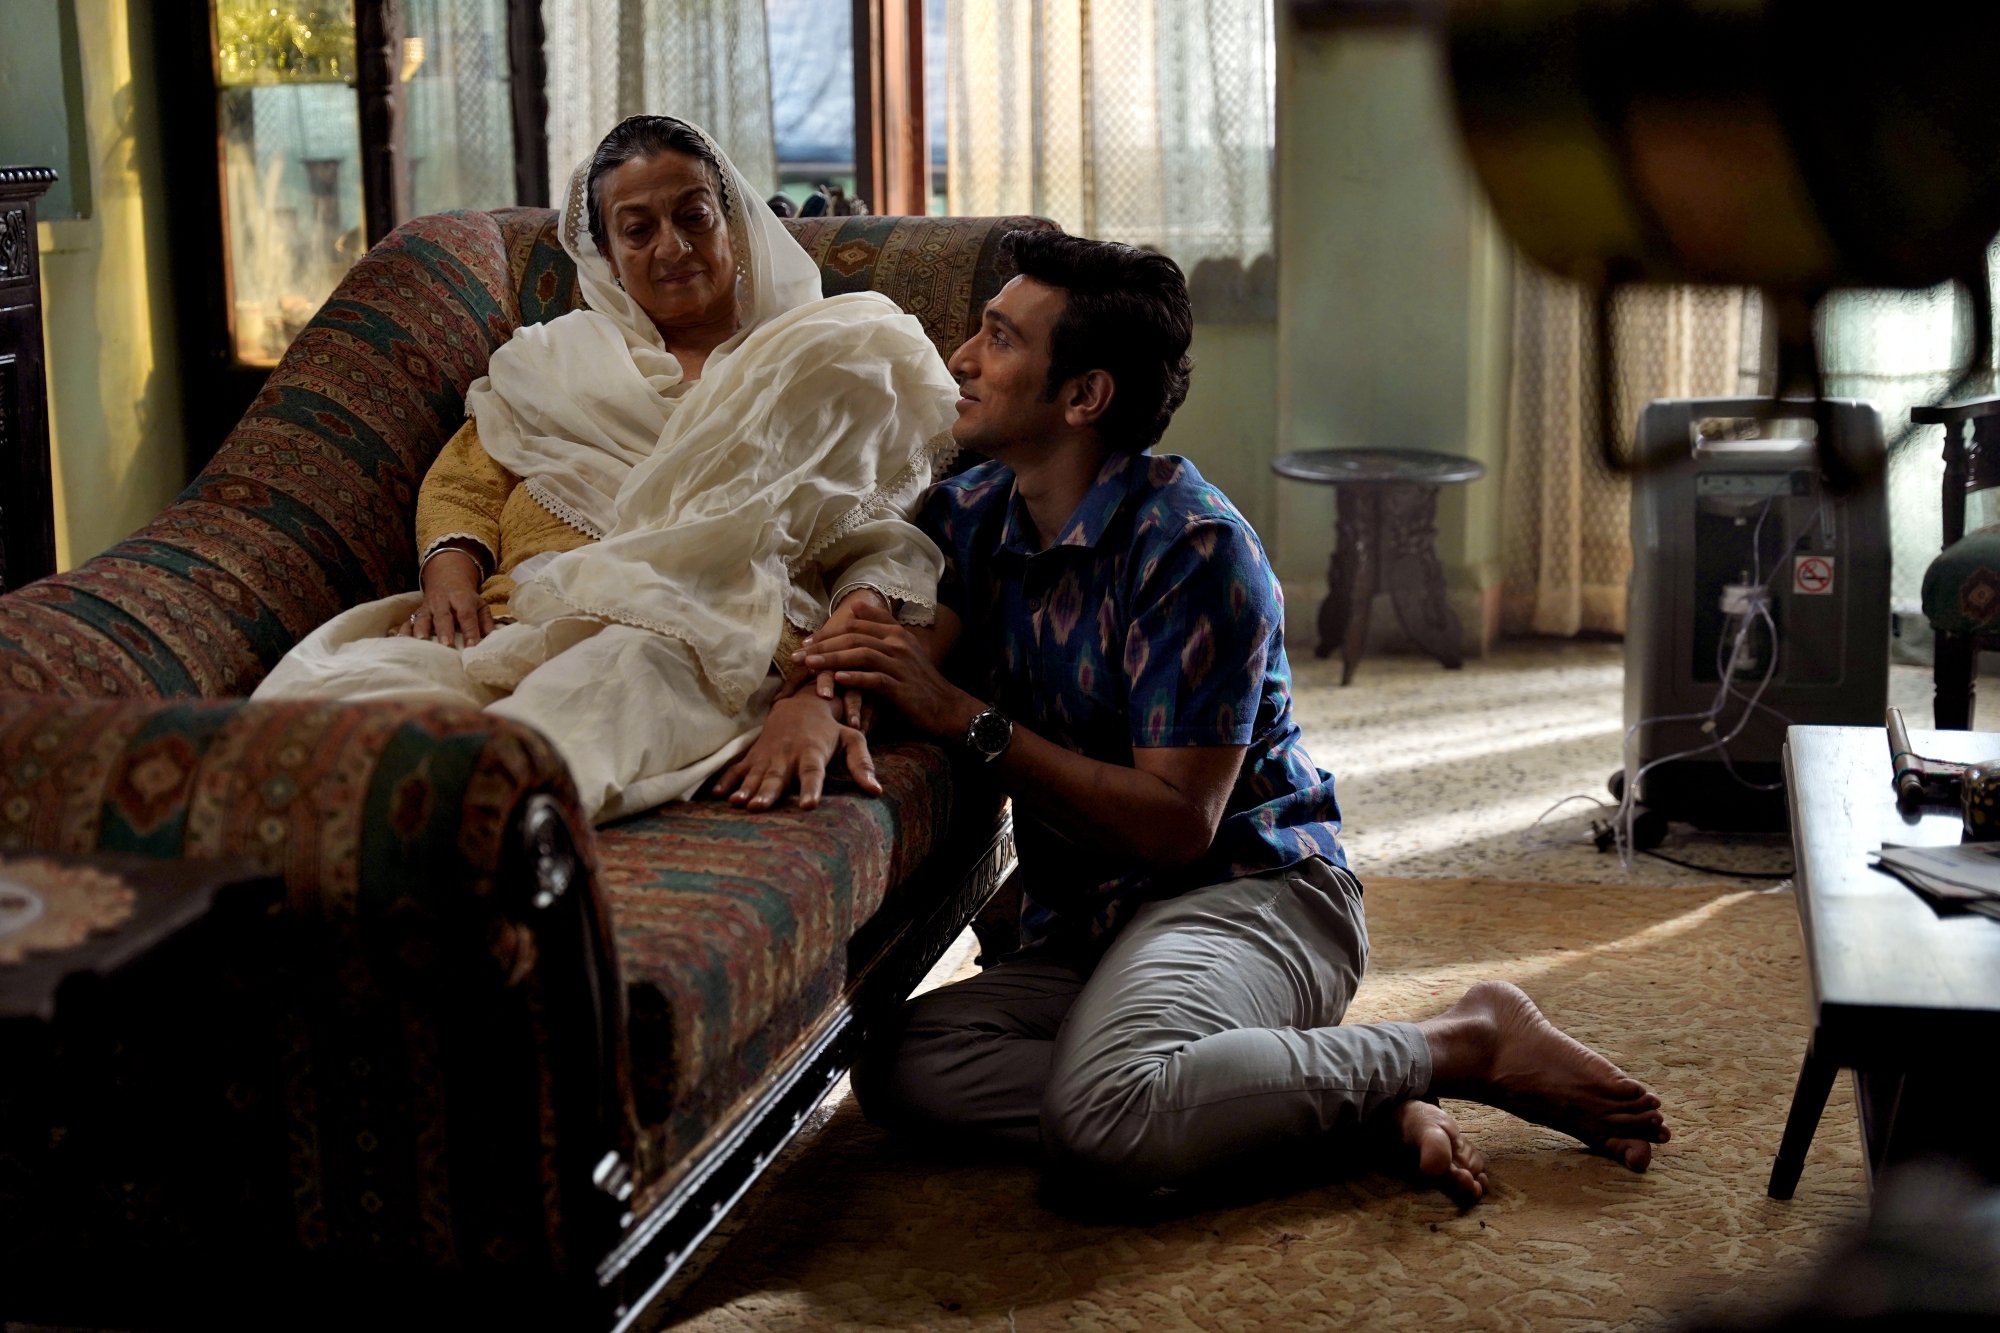 Actors Pratik Gandhi and Tanuja in a still from 'Modern Love Mumbai', with Gandhi perching on the floor by Tanuja's feet.